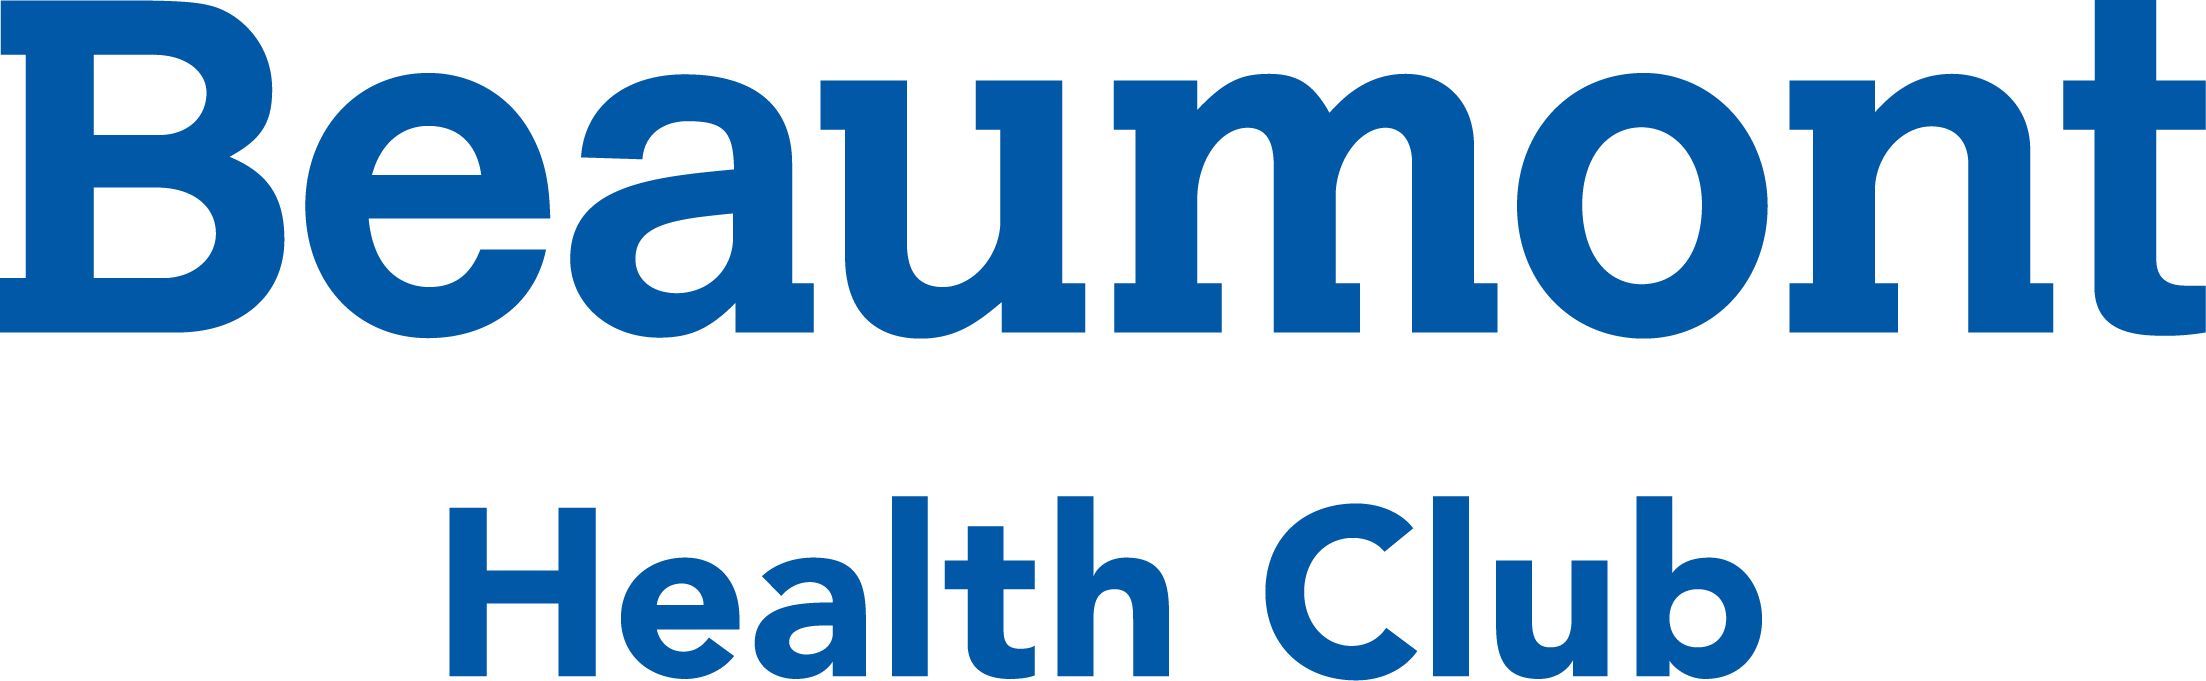 Beaumont Logo - Nutrition Coaching & Dietary Meal Plans | Beaumont Health Club